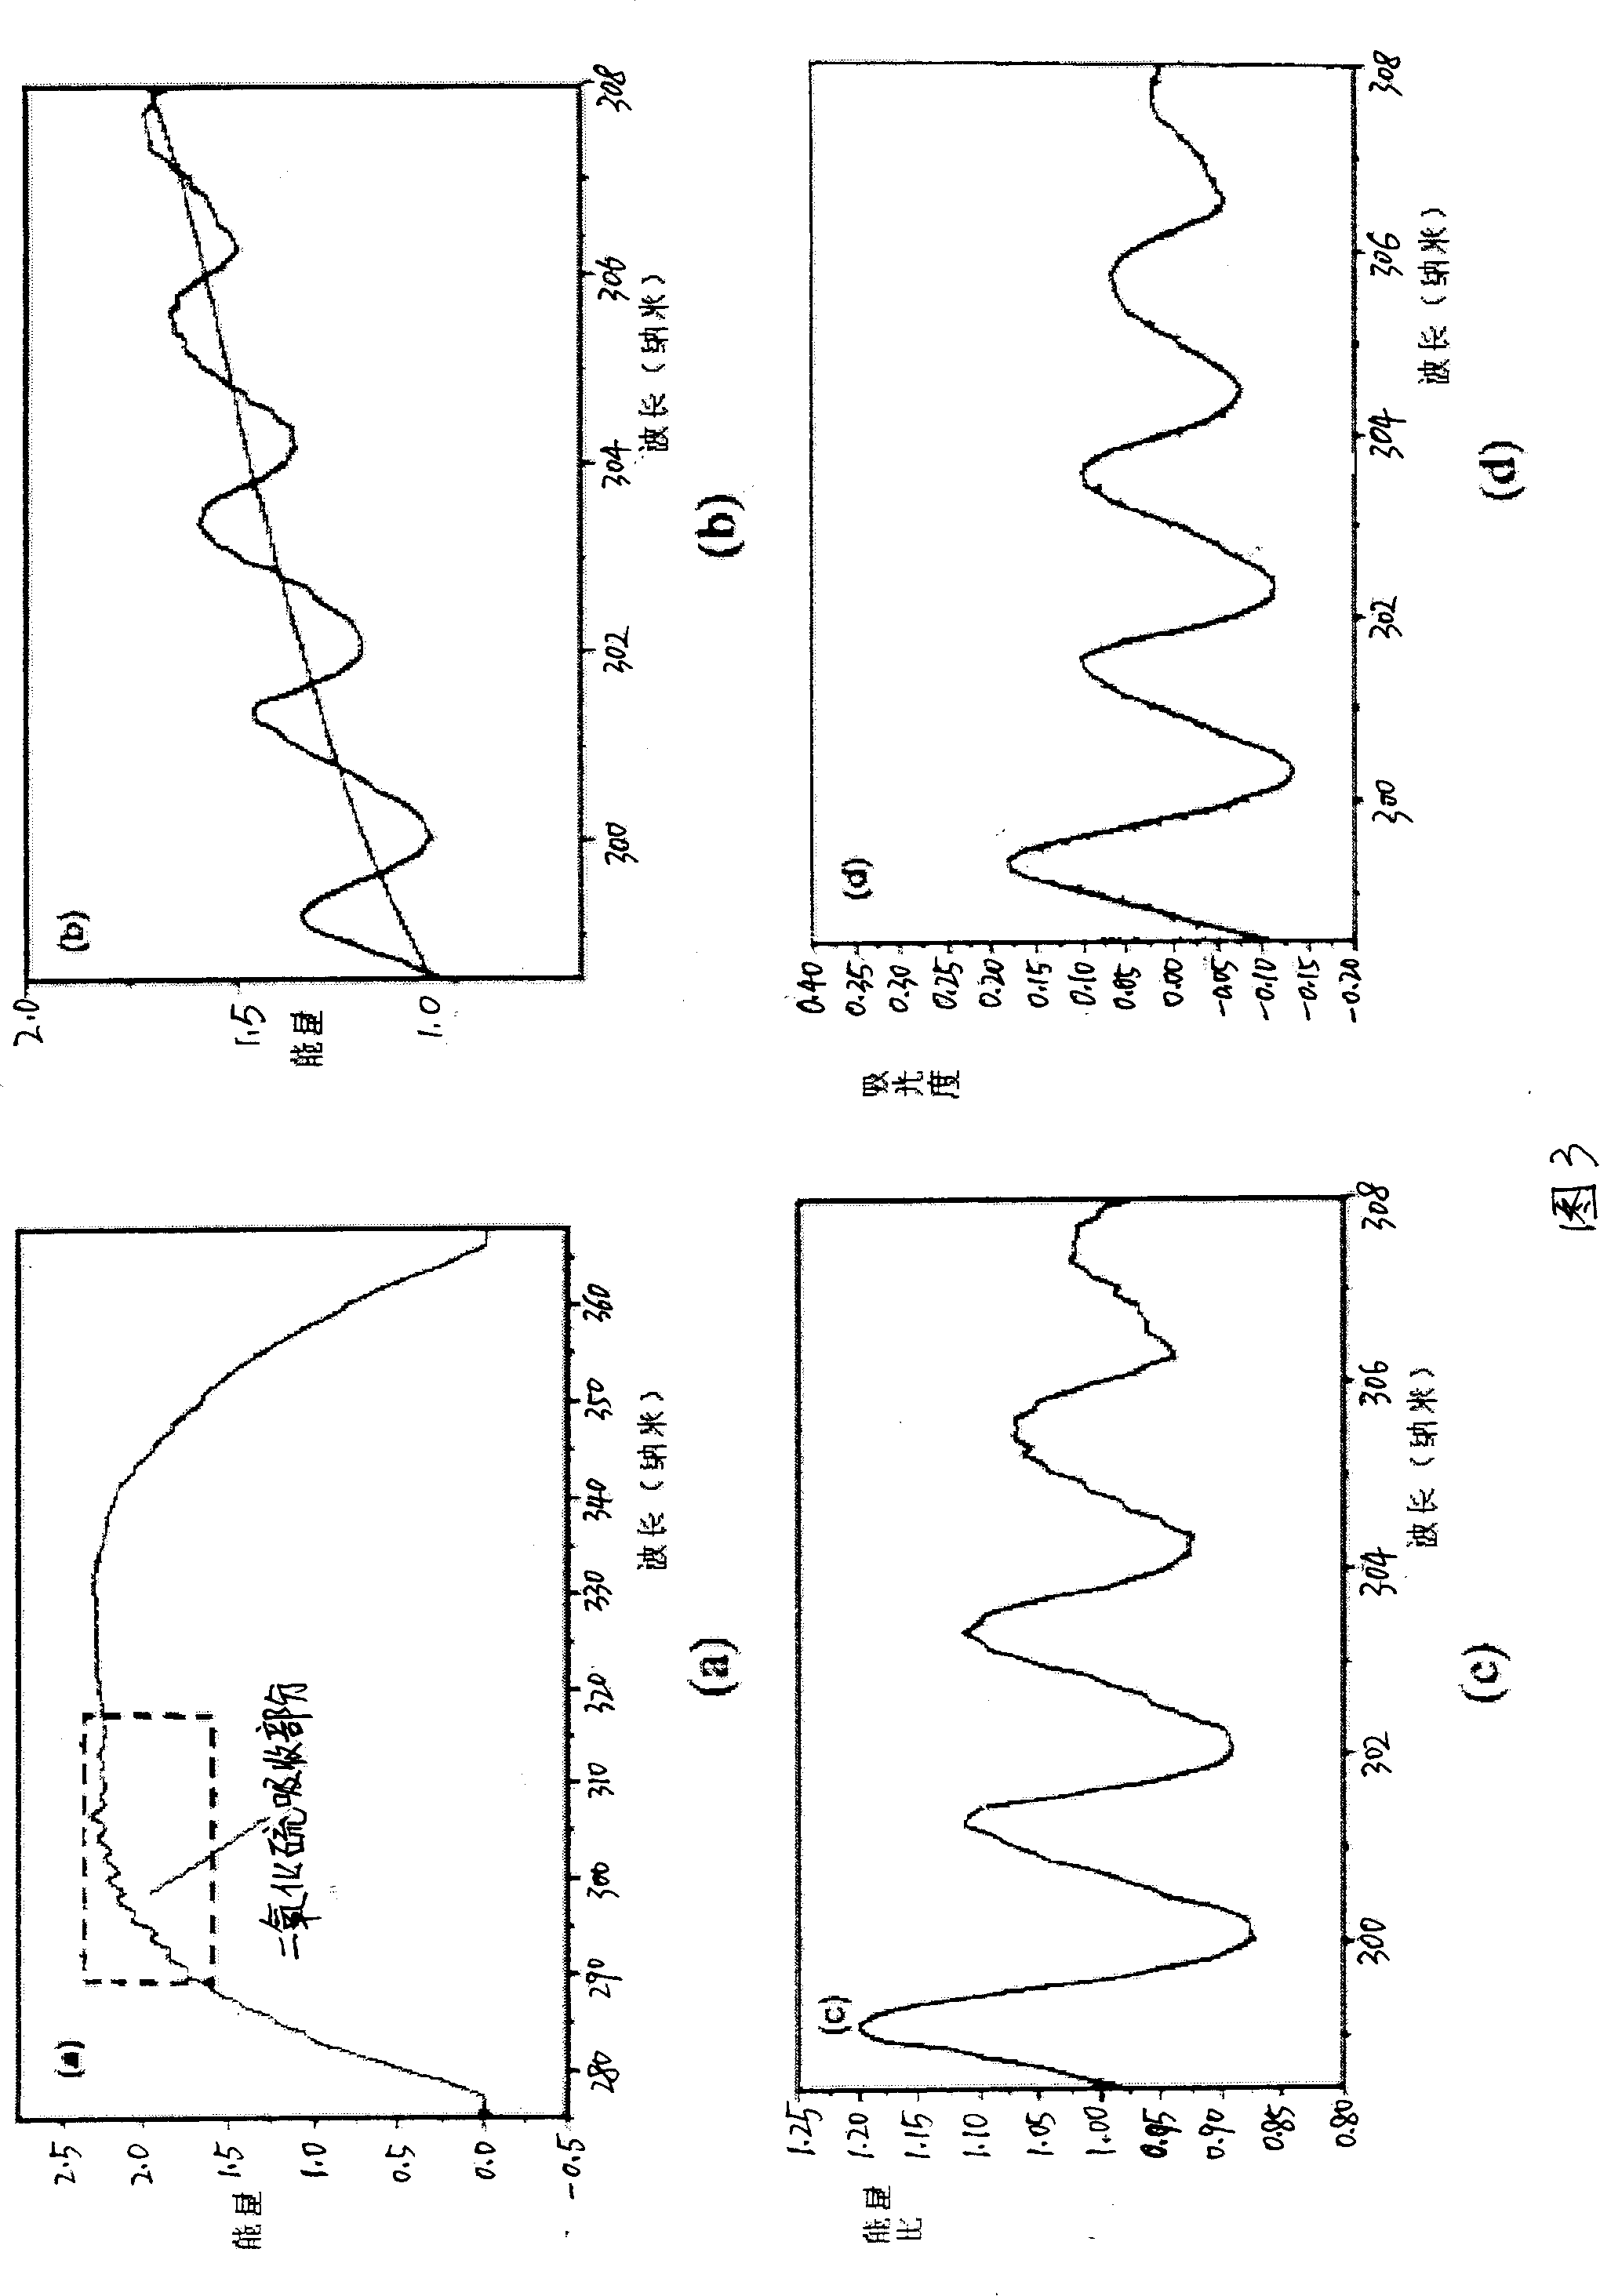 Differential optical absorption spectroscopy air quality detection system